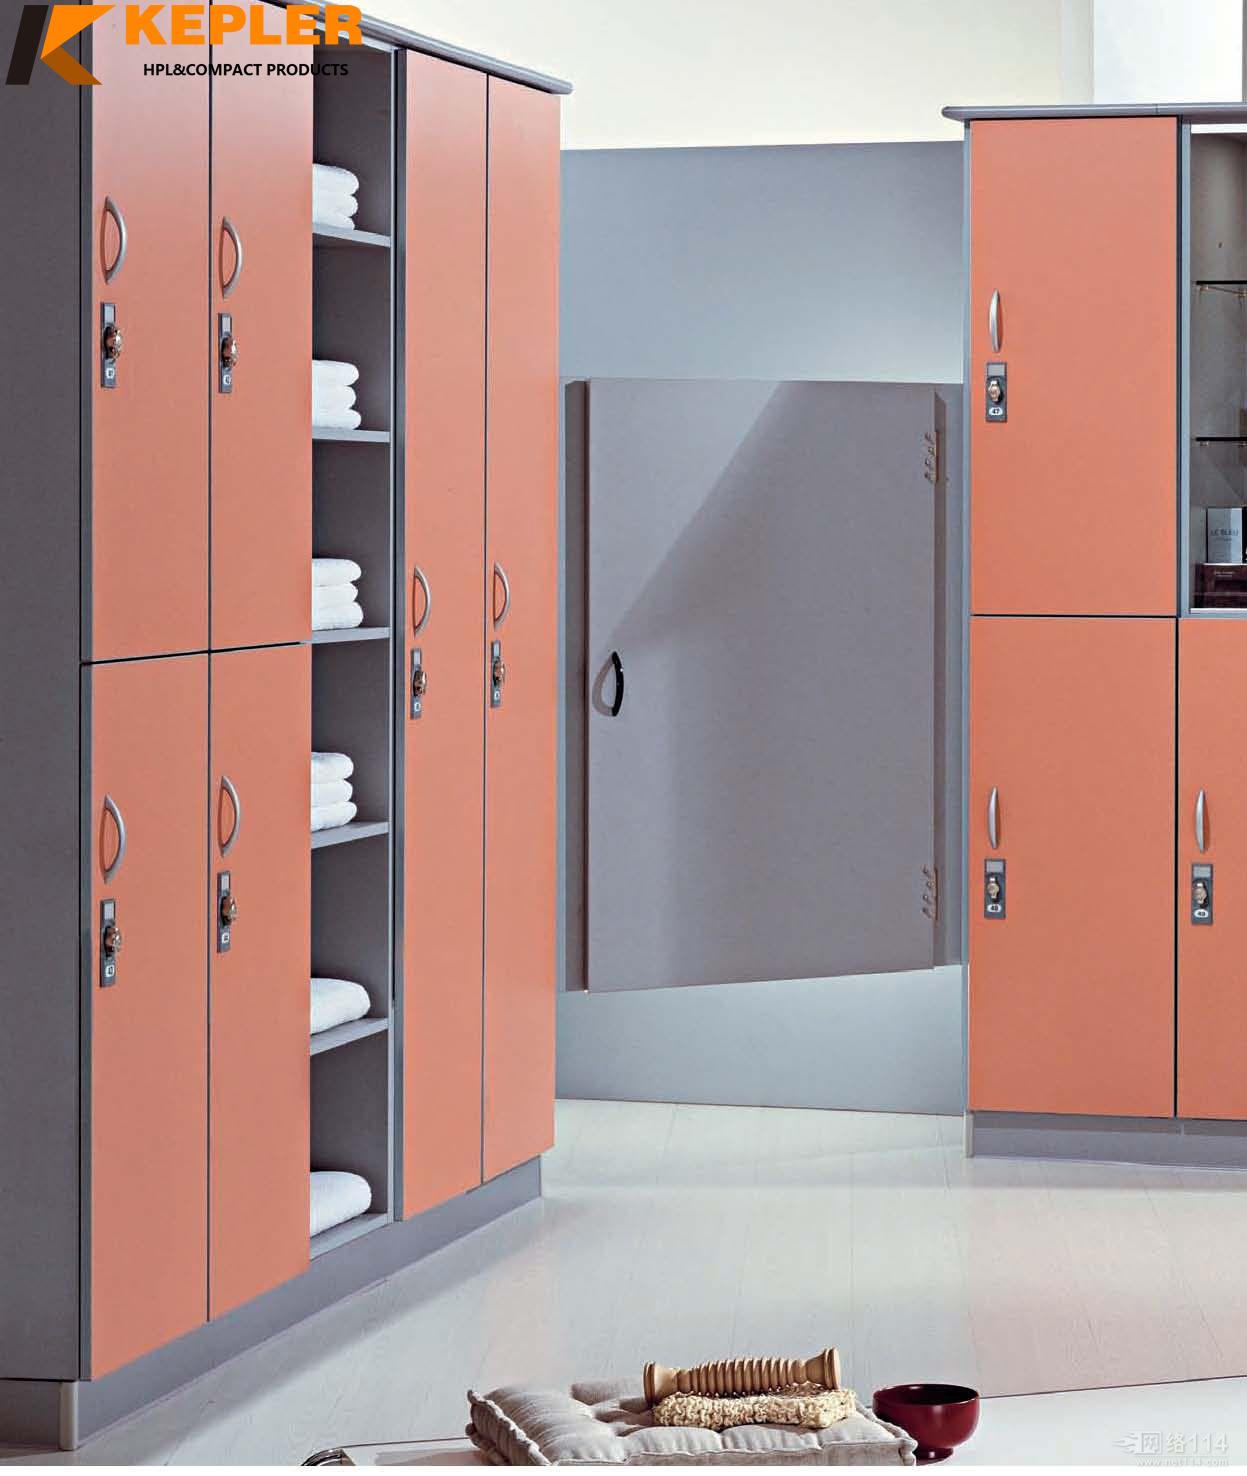 Kepler new design durable hpl compact laminate storage cabinet locker with intelligent lock made in China